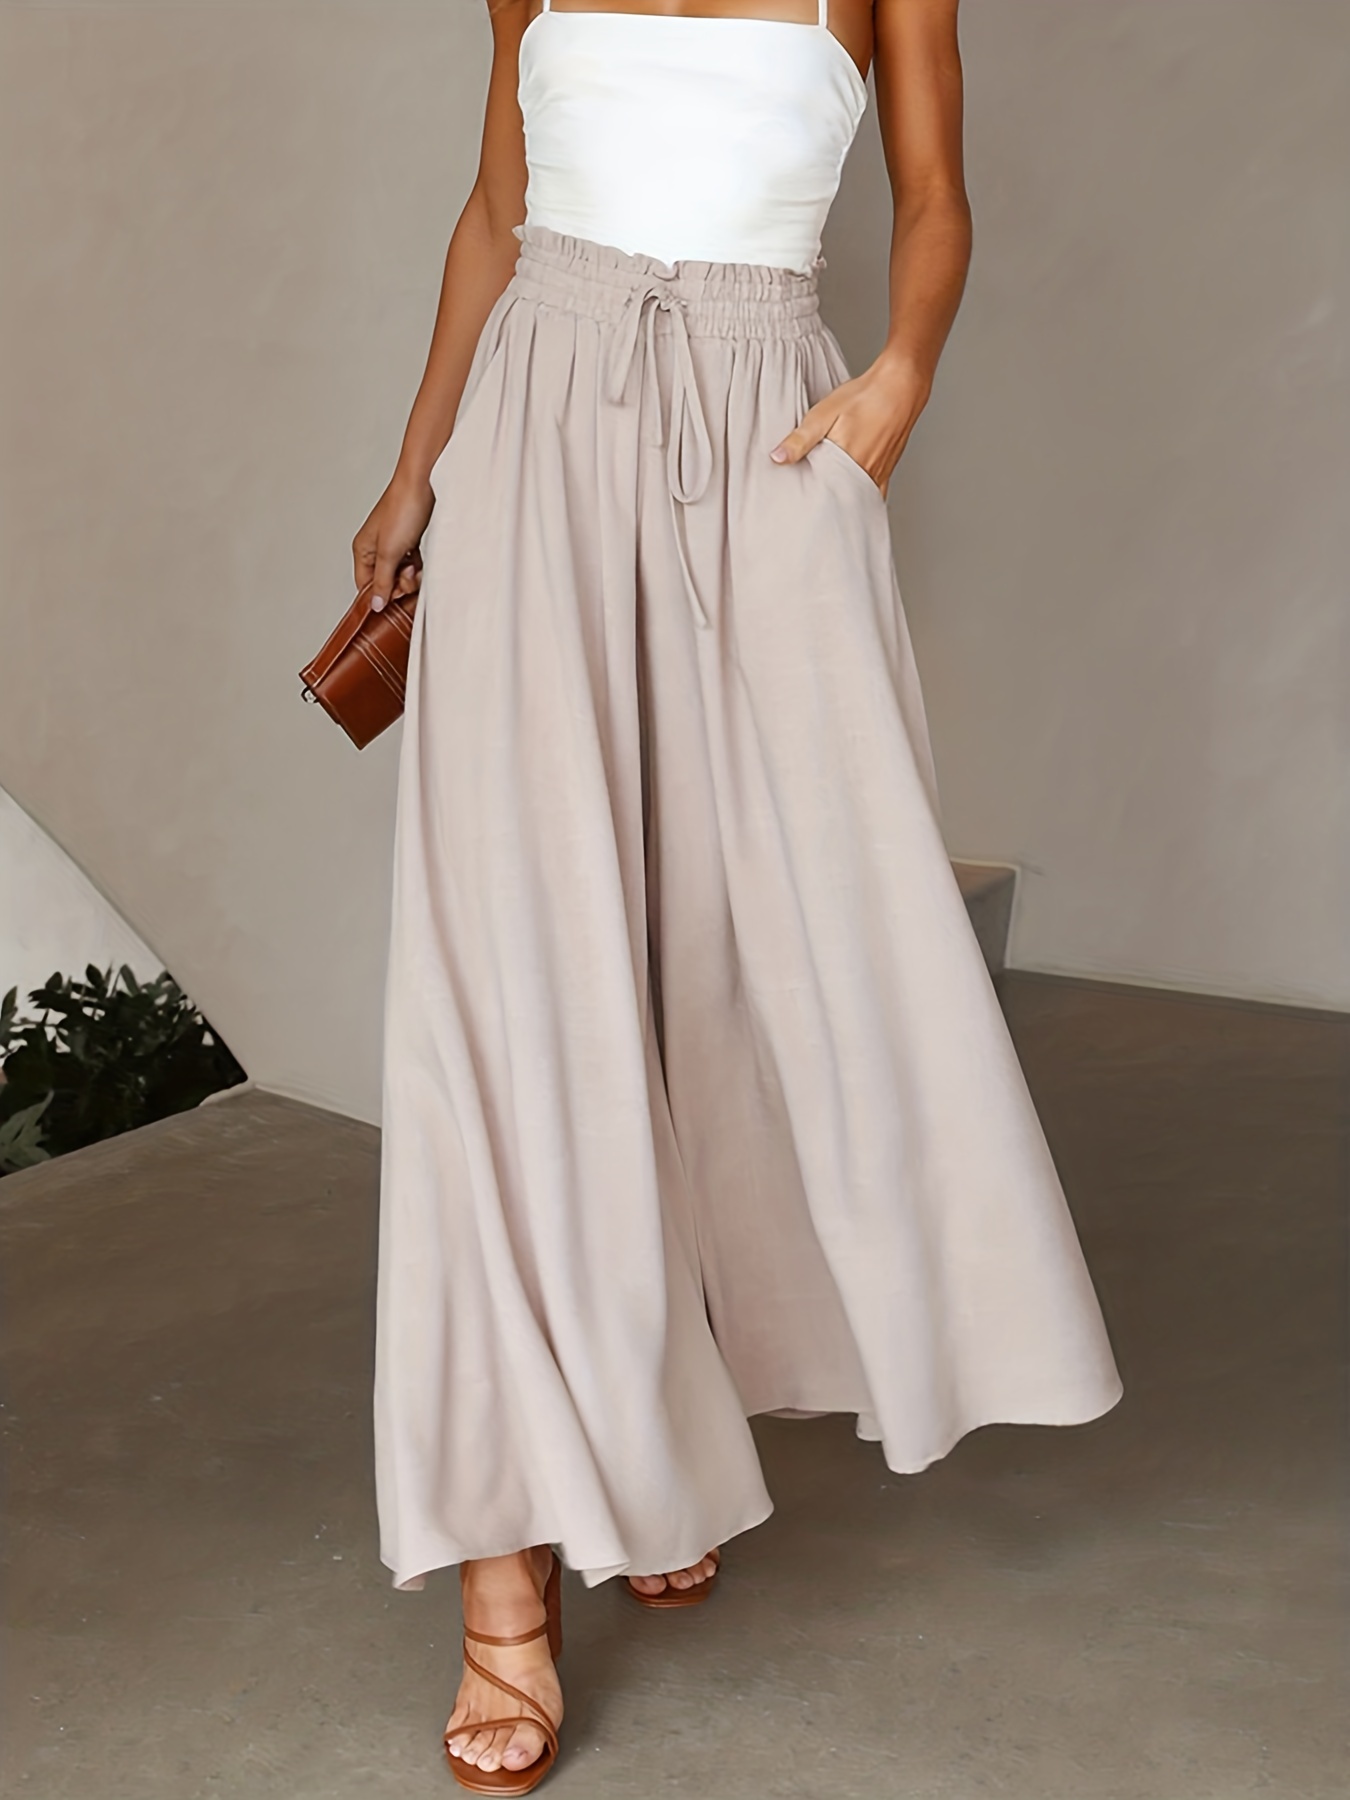 JNGSA Flowy Pants for Women Casual High Waisted Wide Leg Palazzo